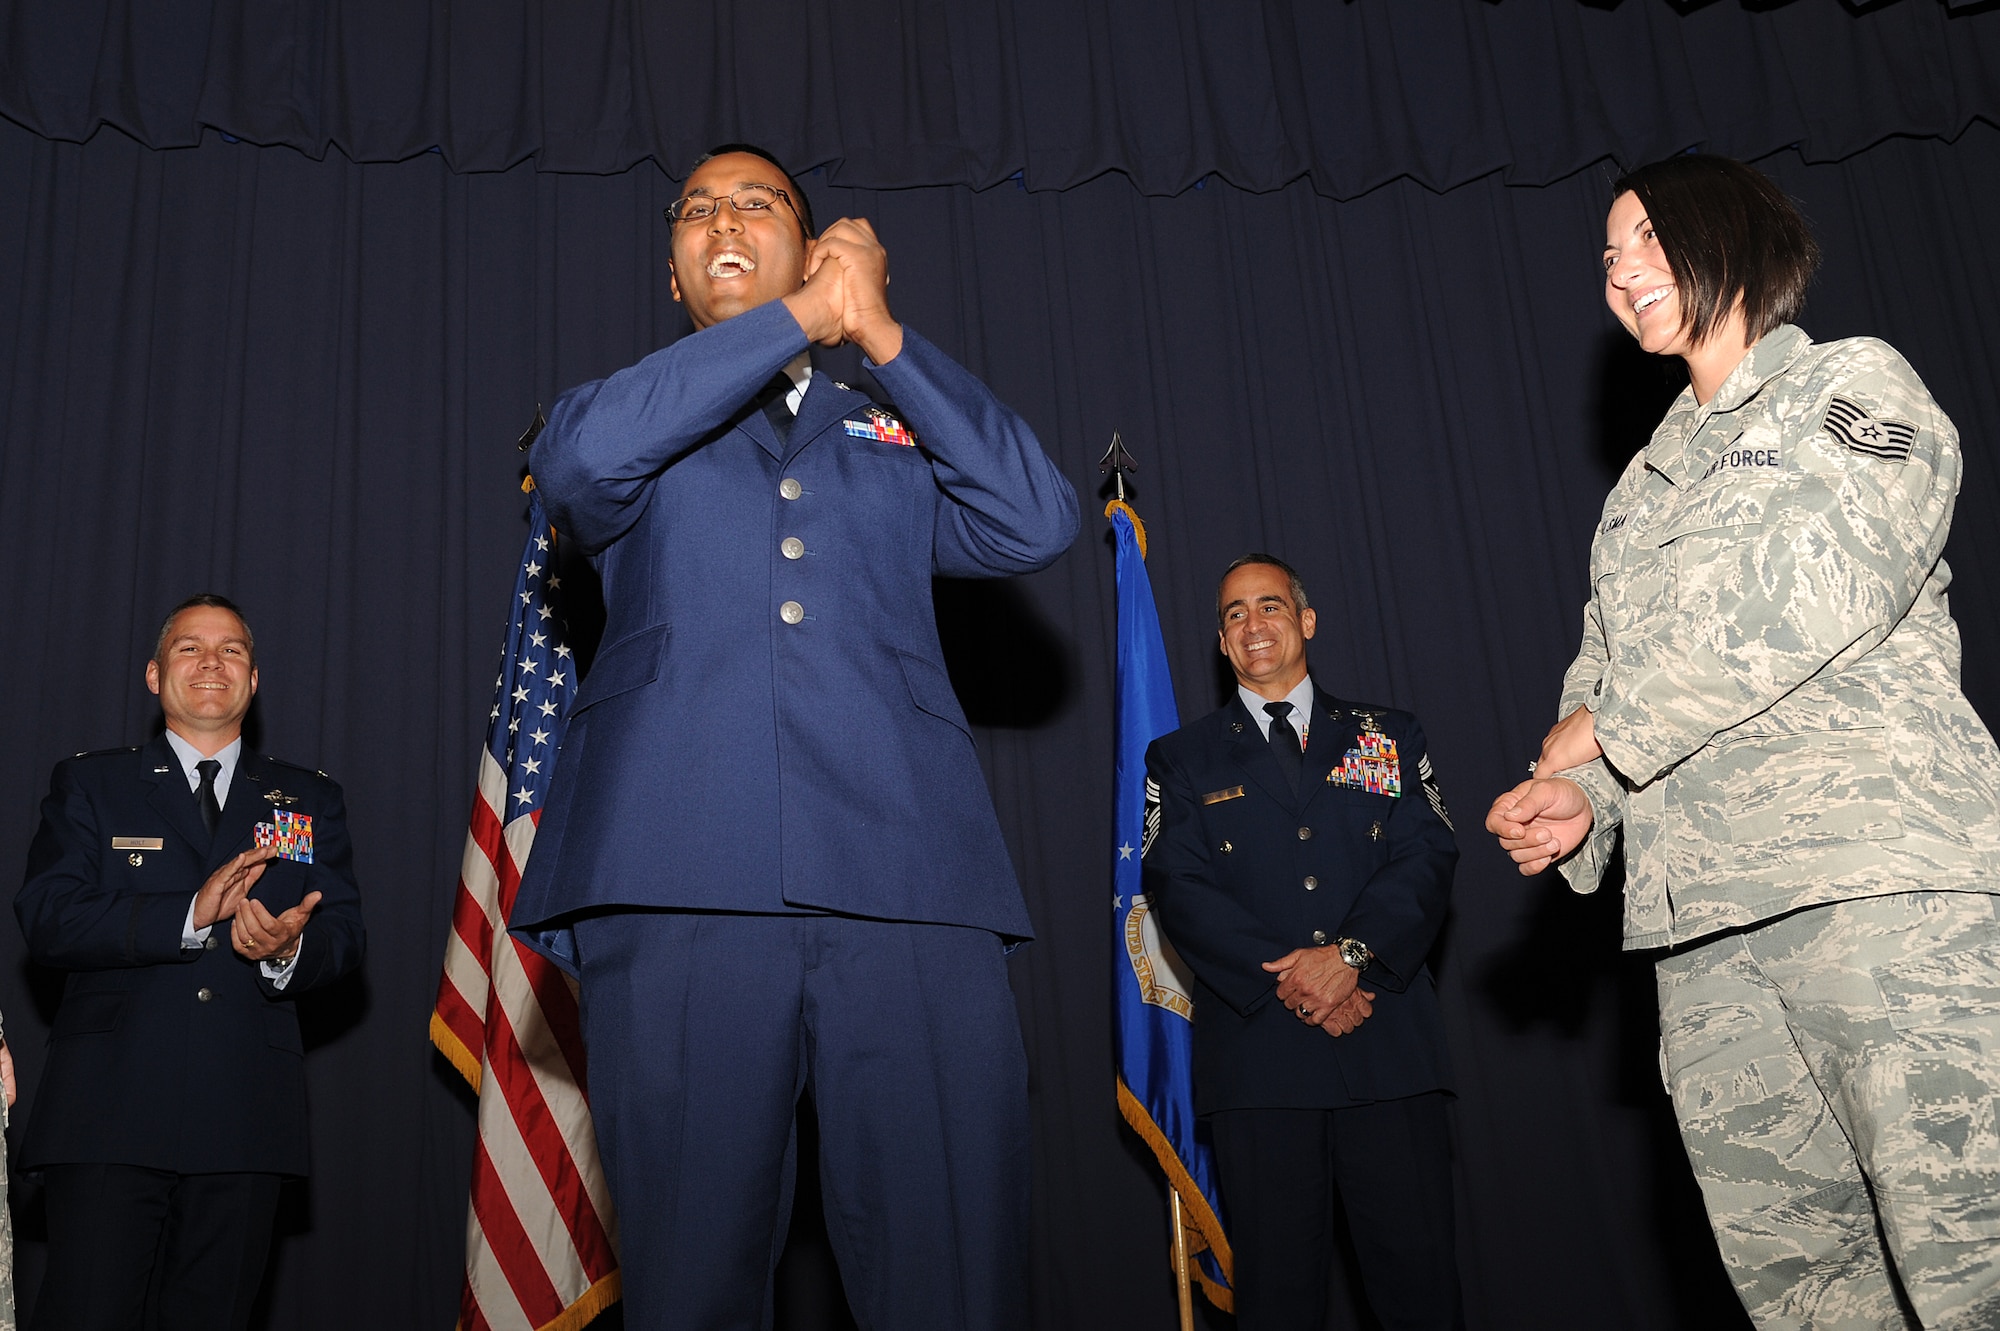 U.S. Air Force Staff Sgt. Alexander Prasadi, a maintenance database manager with 1st Special Operations Medical Operations Squadron, celebrates his promotion to staff sergeant during an NCO recognition ceremony at the King Auditorium on Hurlburt Field, Fla., Oct. 30, 2012. The NCO recognition ceremony welcomes new staff sergeants to the NCO tier. (U.S. Air Force Photo/Airman 1st Class Michelle Vickers)